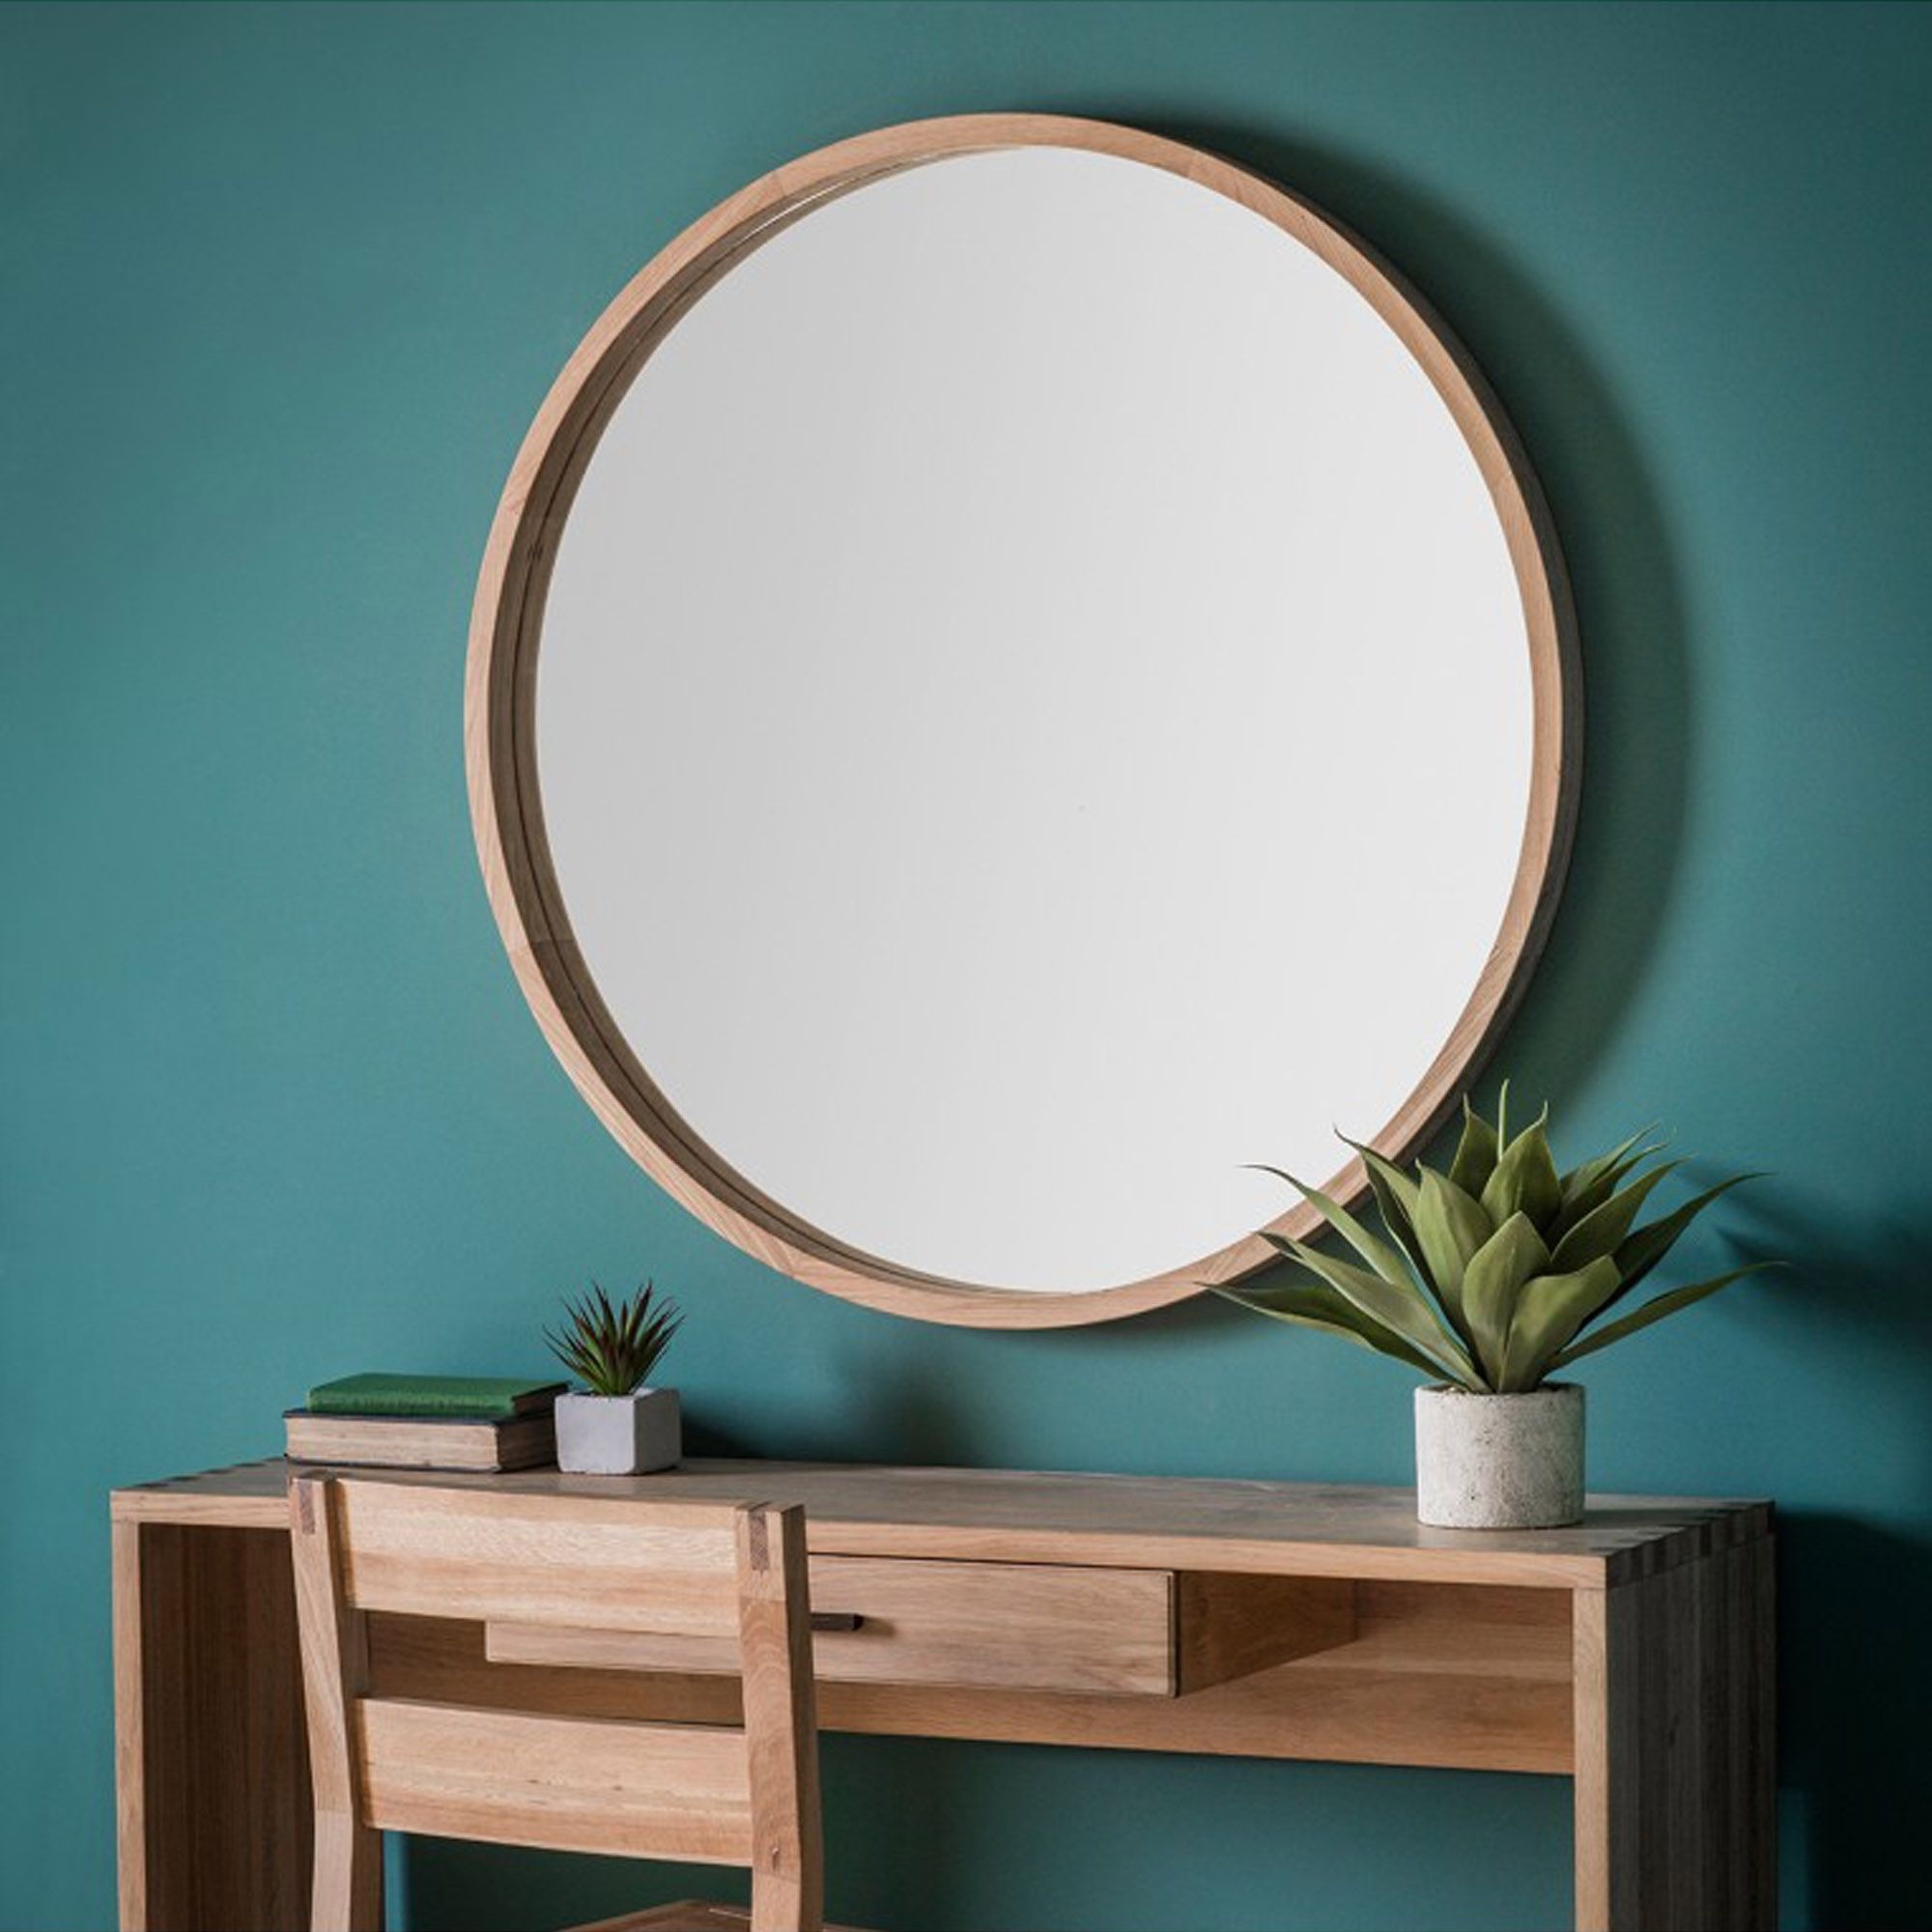 Bowman Large Round Wall Mirror | Wall Mirrors | Homesdirect365 Throughout Scalloped Round Modern Oversized Wall Mirrors (View 4 of 15)